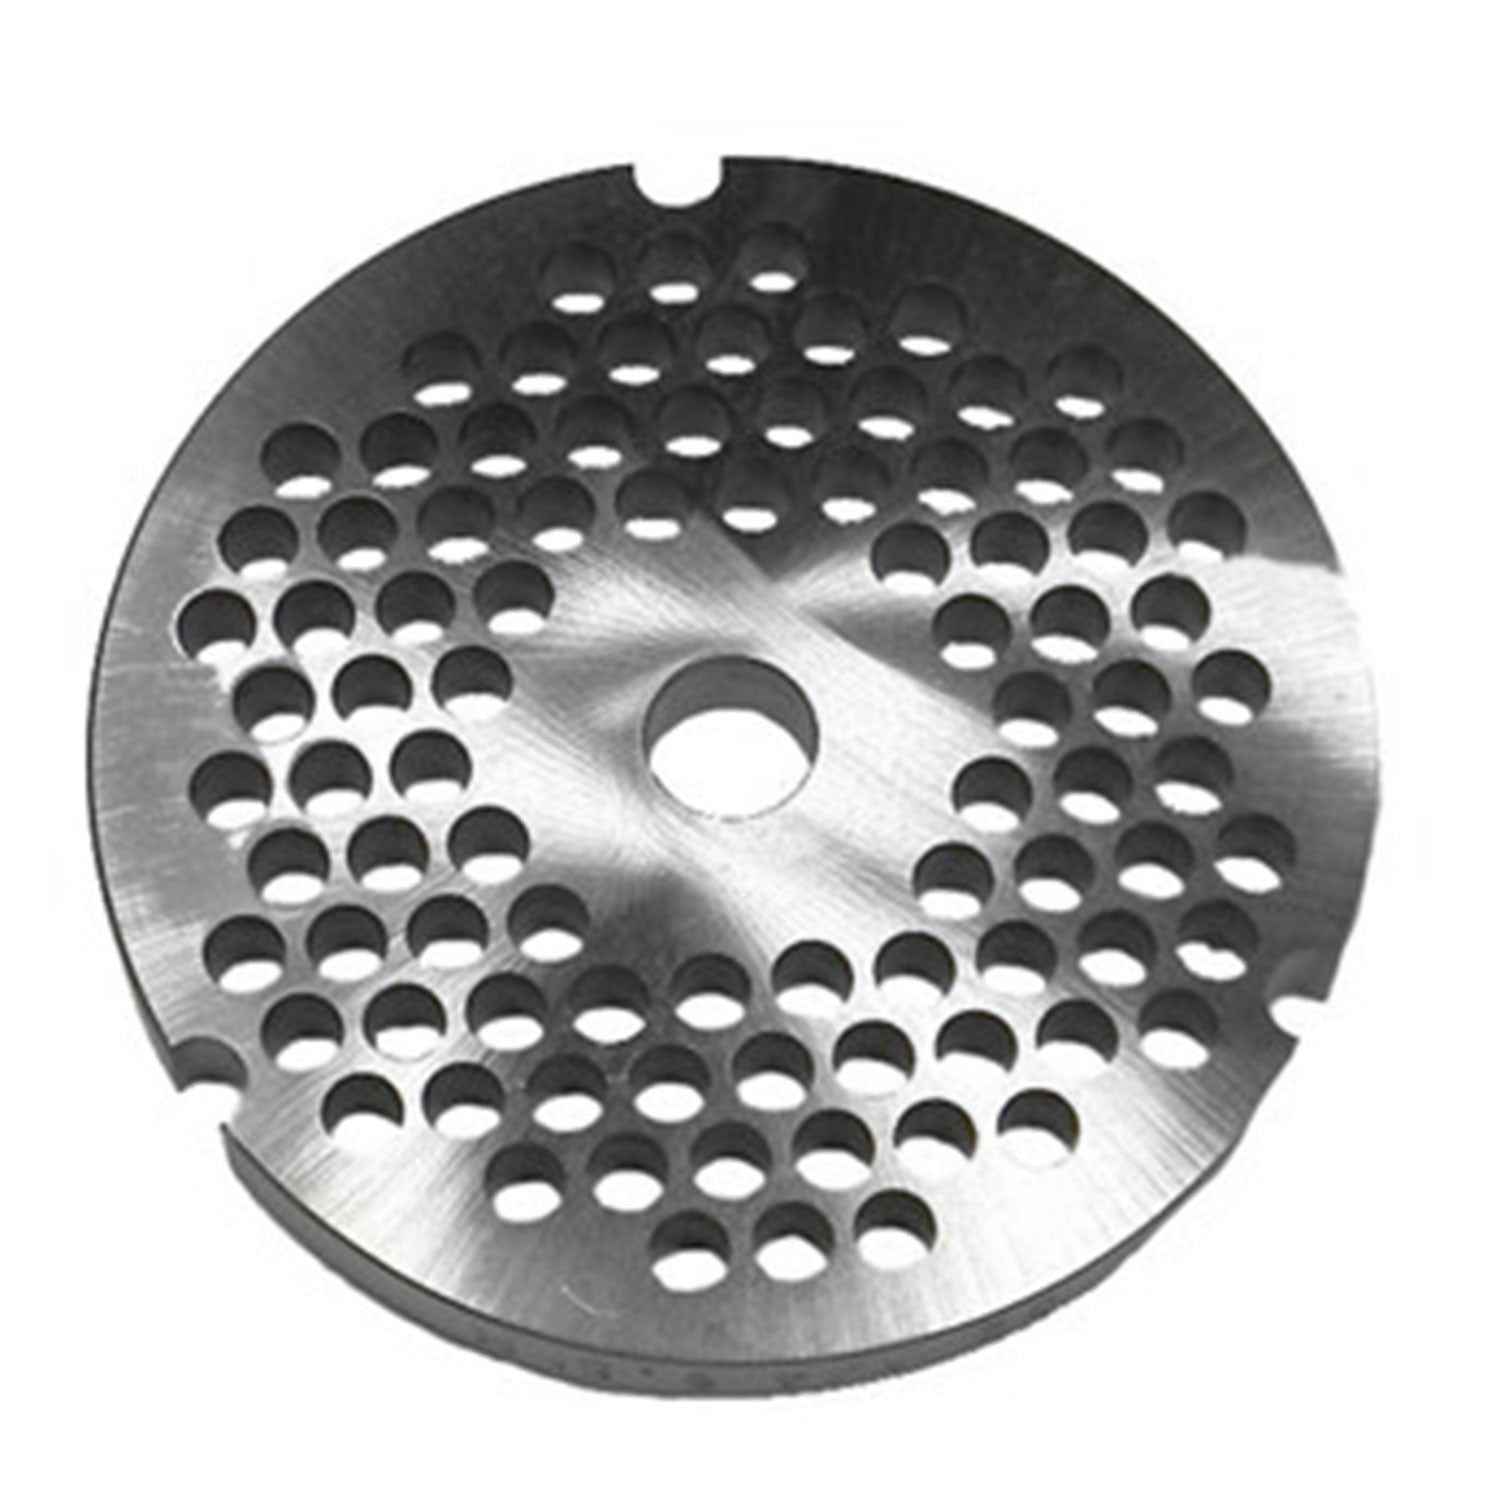 Size 32 DC Reversible Meat Grinder Plate, 1/4